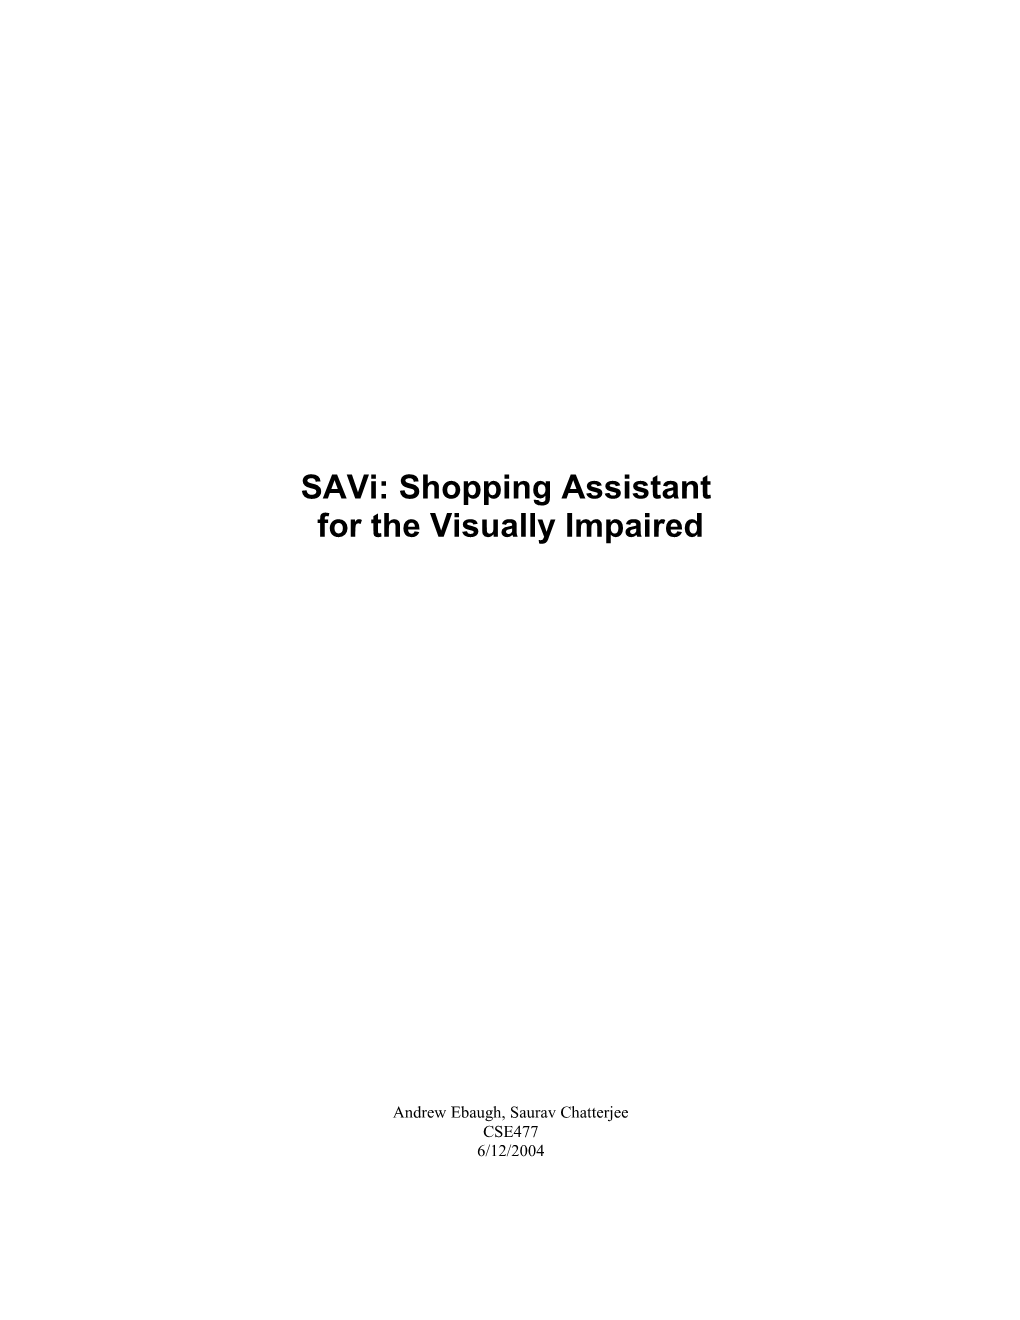 Savi: Shopping Assistant for the Visually Impaired